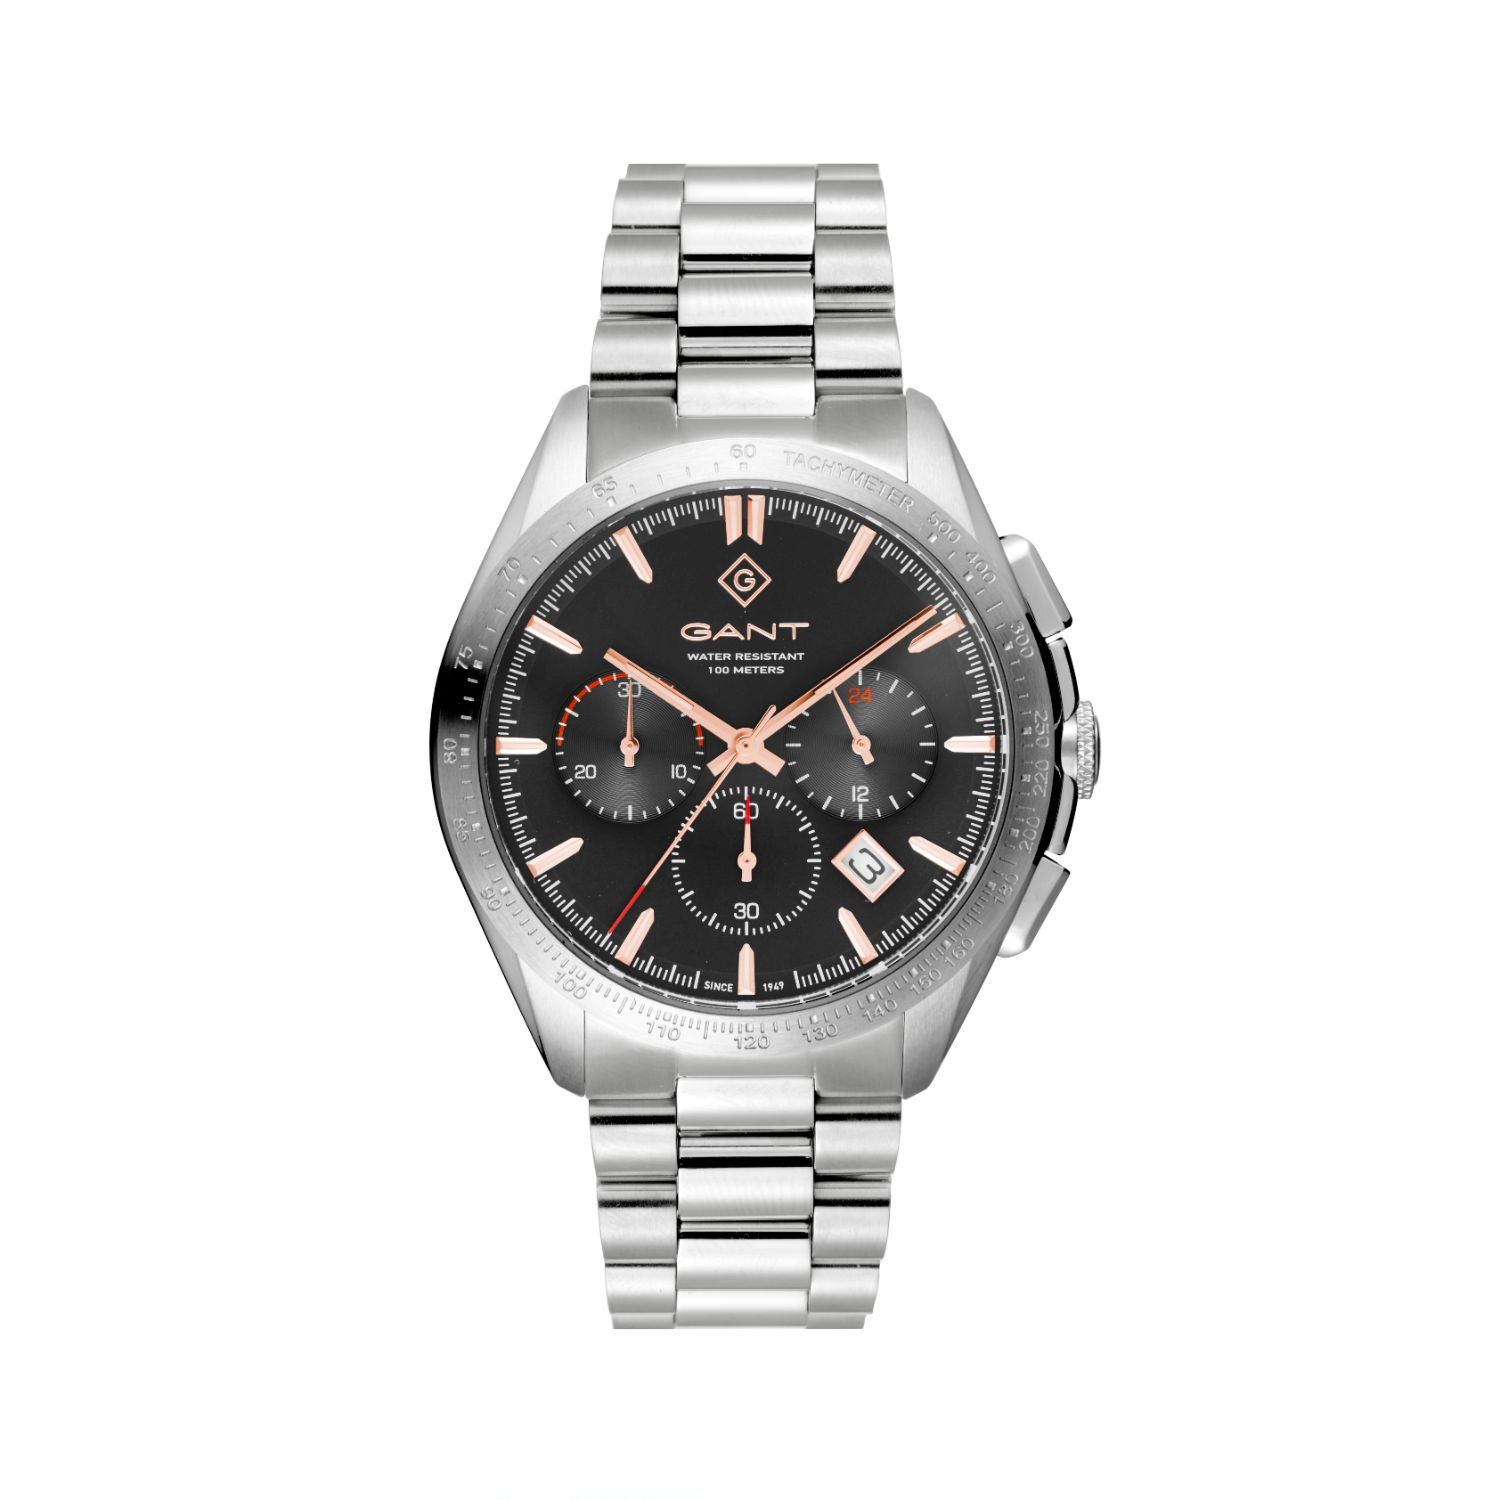 Mens Gant stainless steel watch with grey dial and silver bracelet.